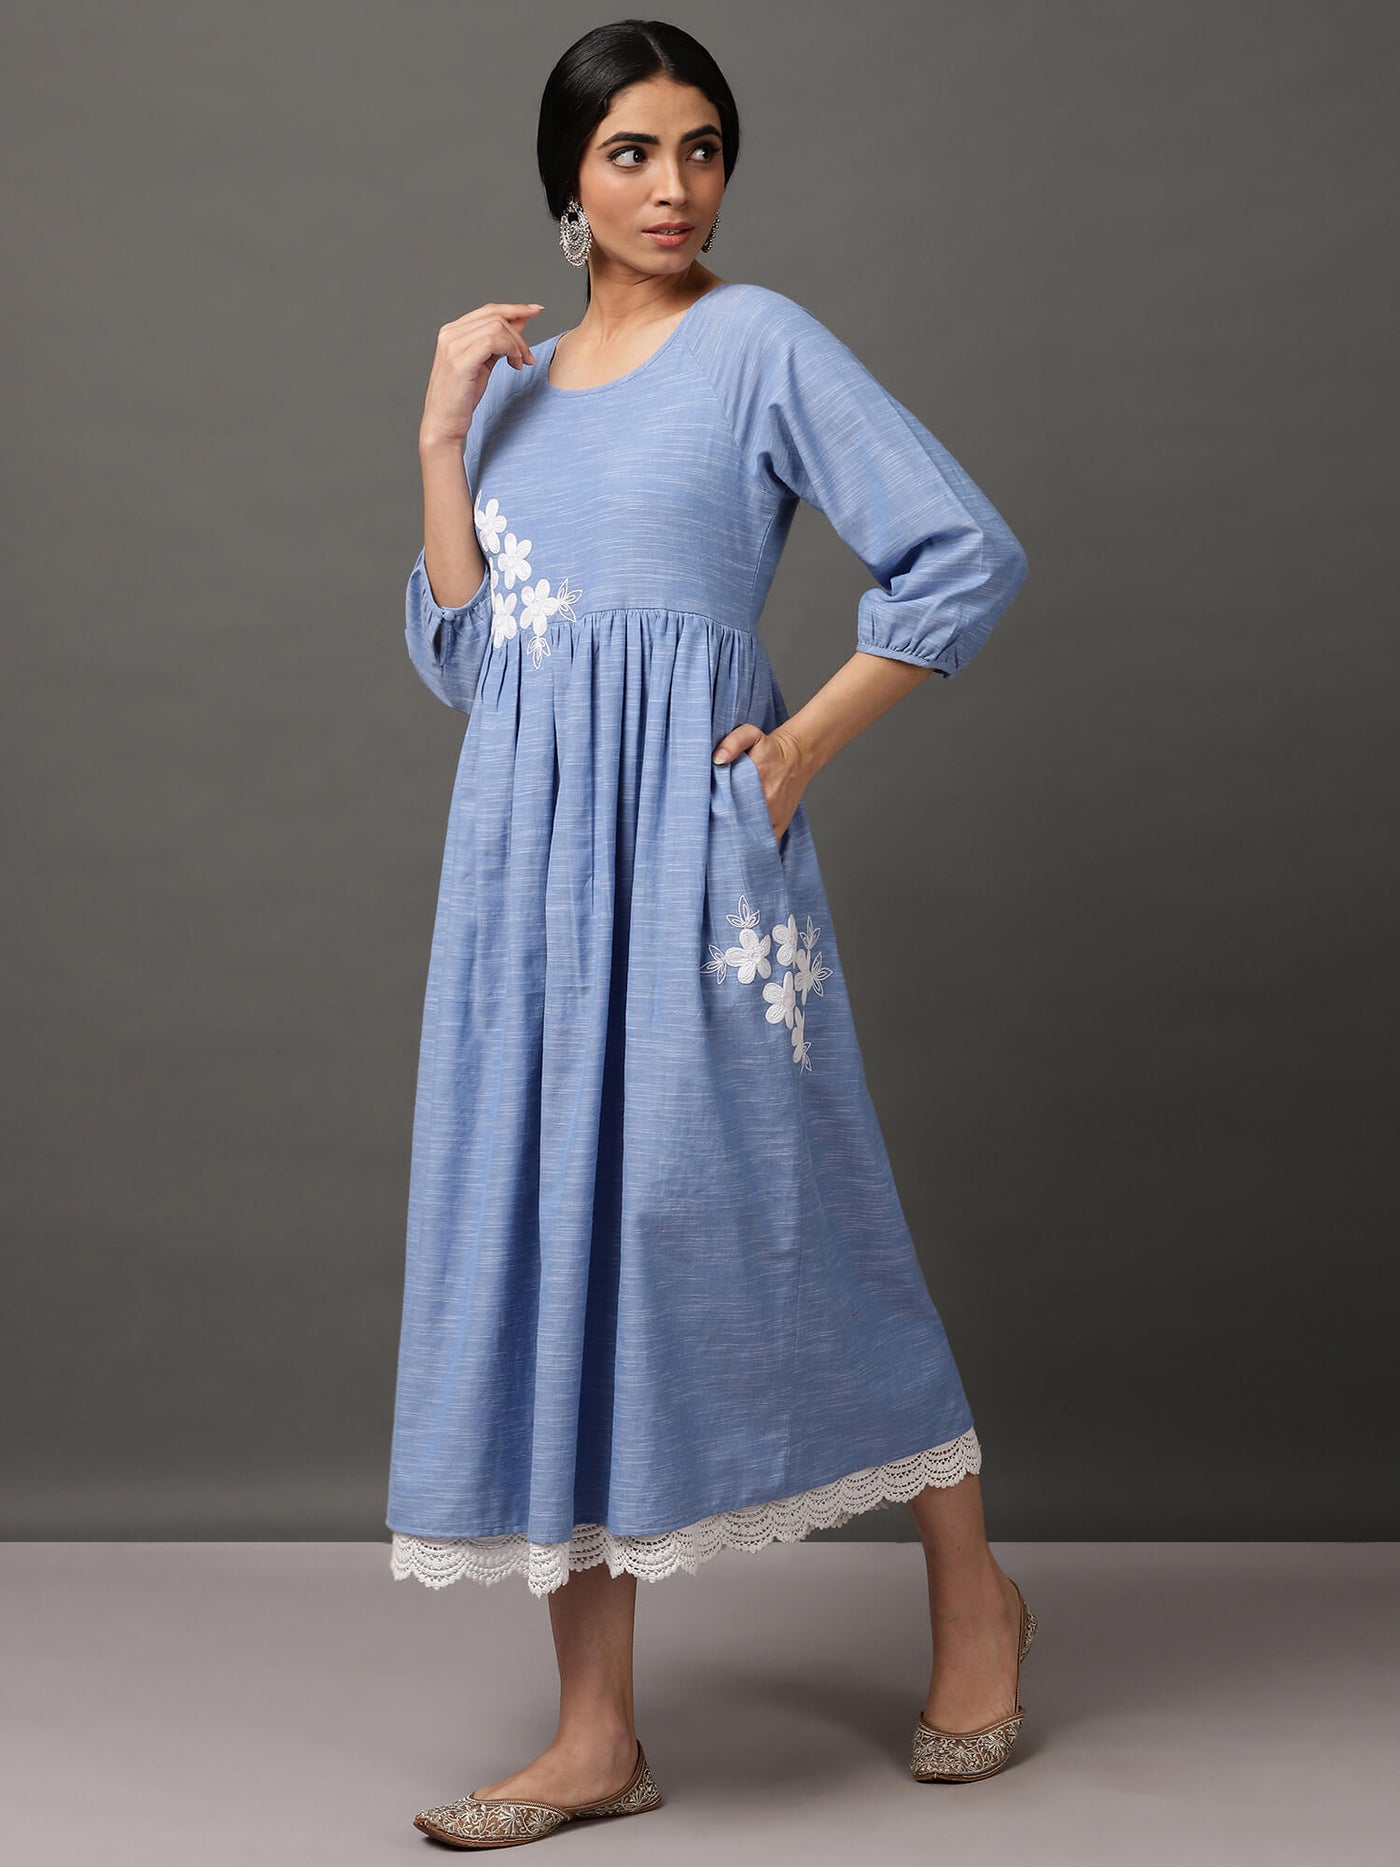 Blue Chambray cotton comfort dress with pockets and lace.